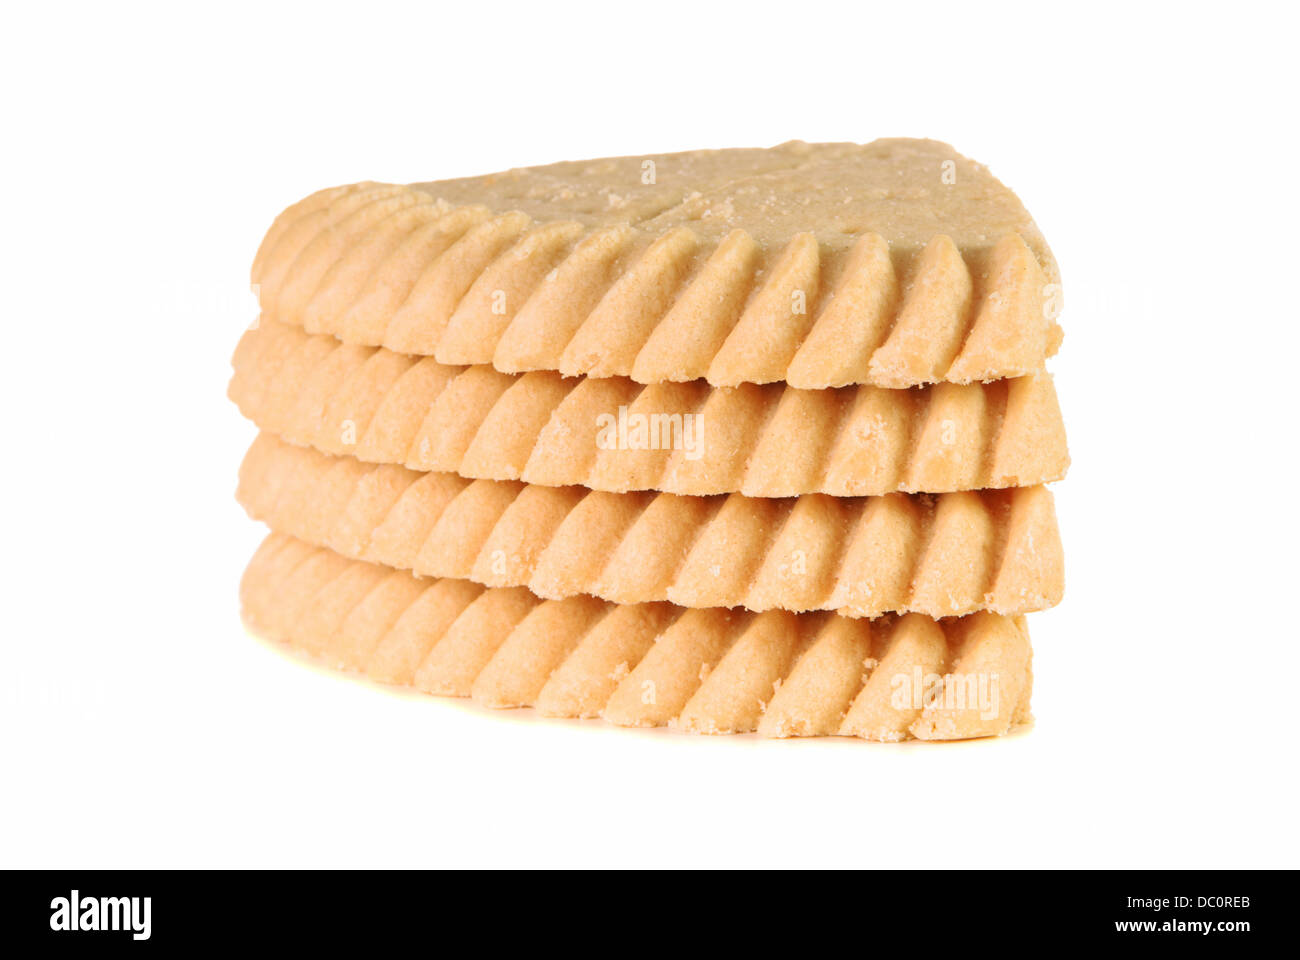 Stack of four pieces of shortbread over white background Stock Photo